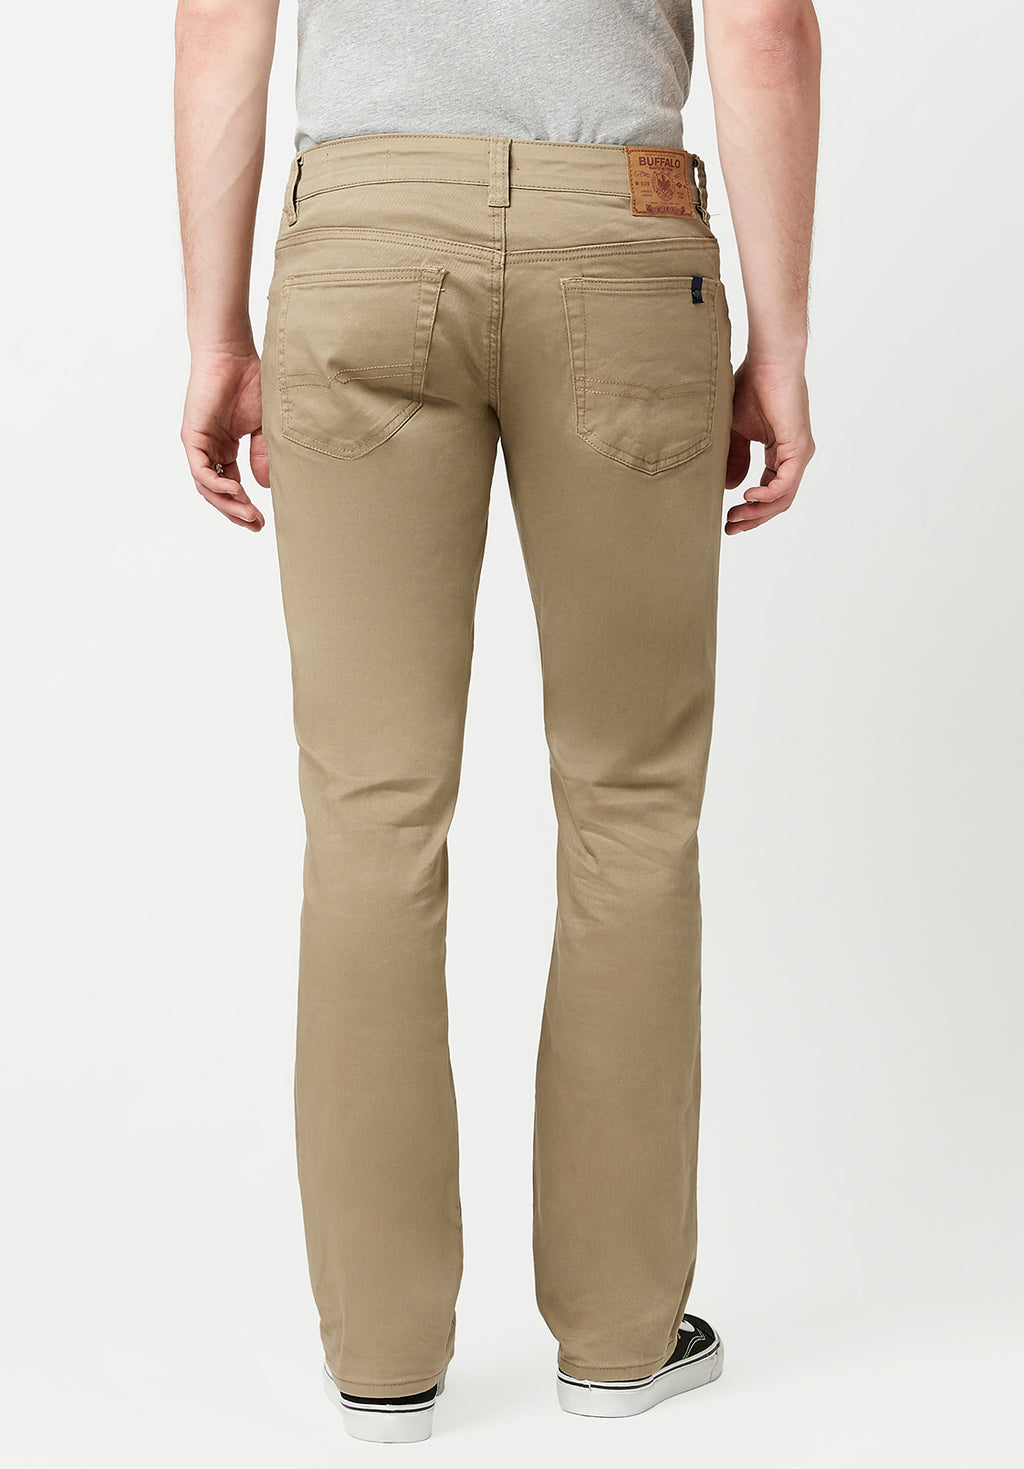 Buffalo Fred Stretch Twill Pant  Mens Pants in Khaki  Buckle